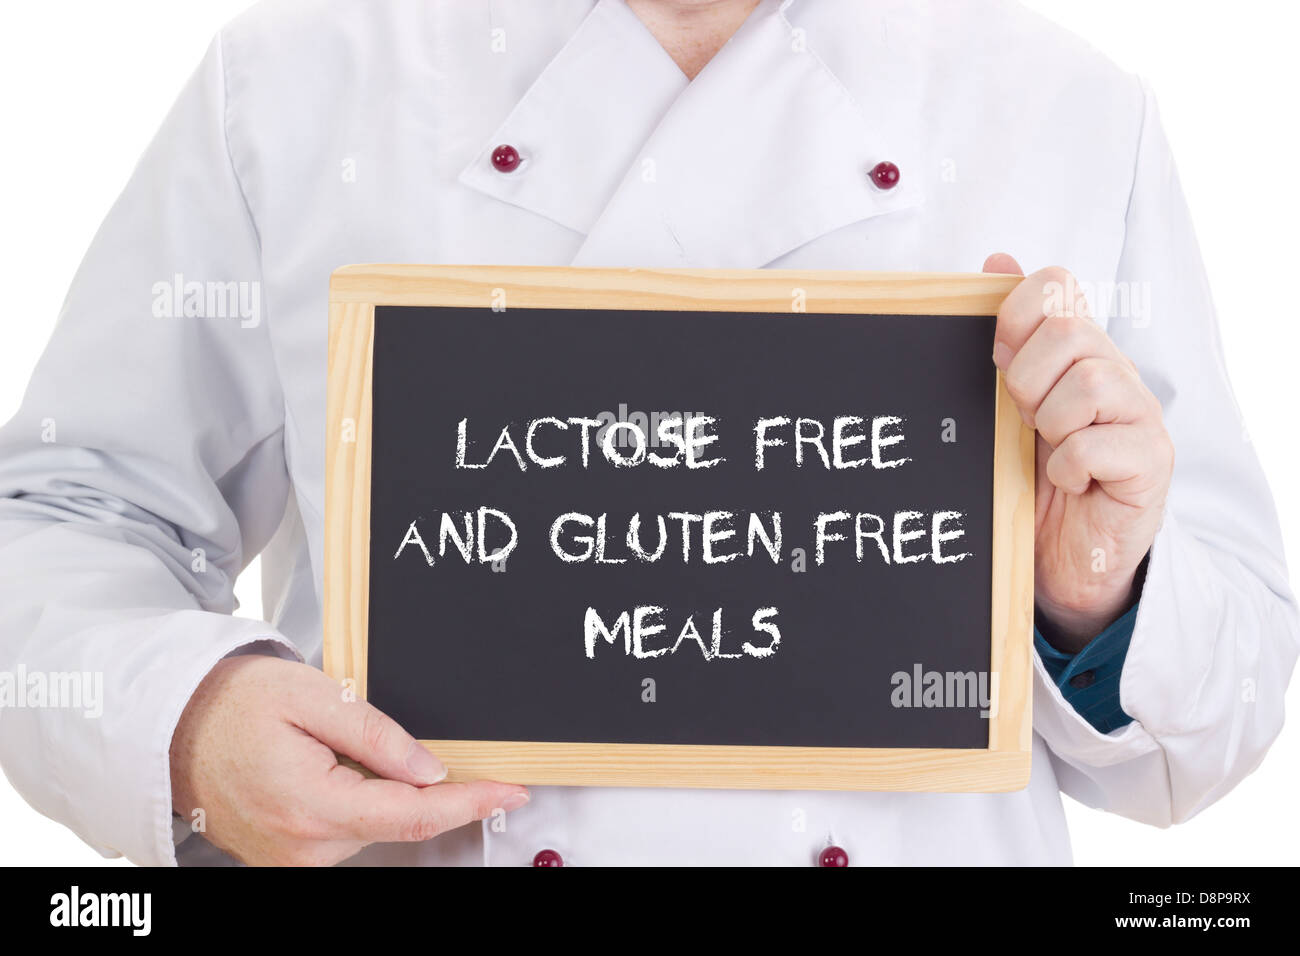 Lactose free and gluten free meals Stock Photo